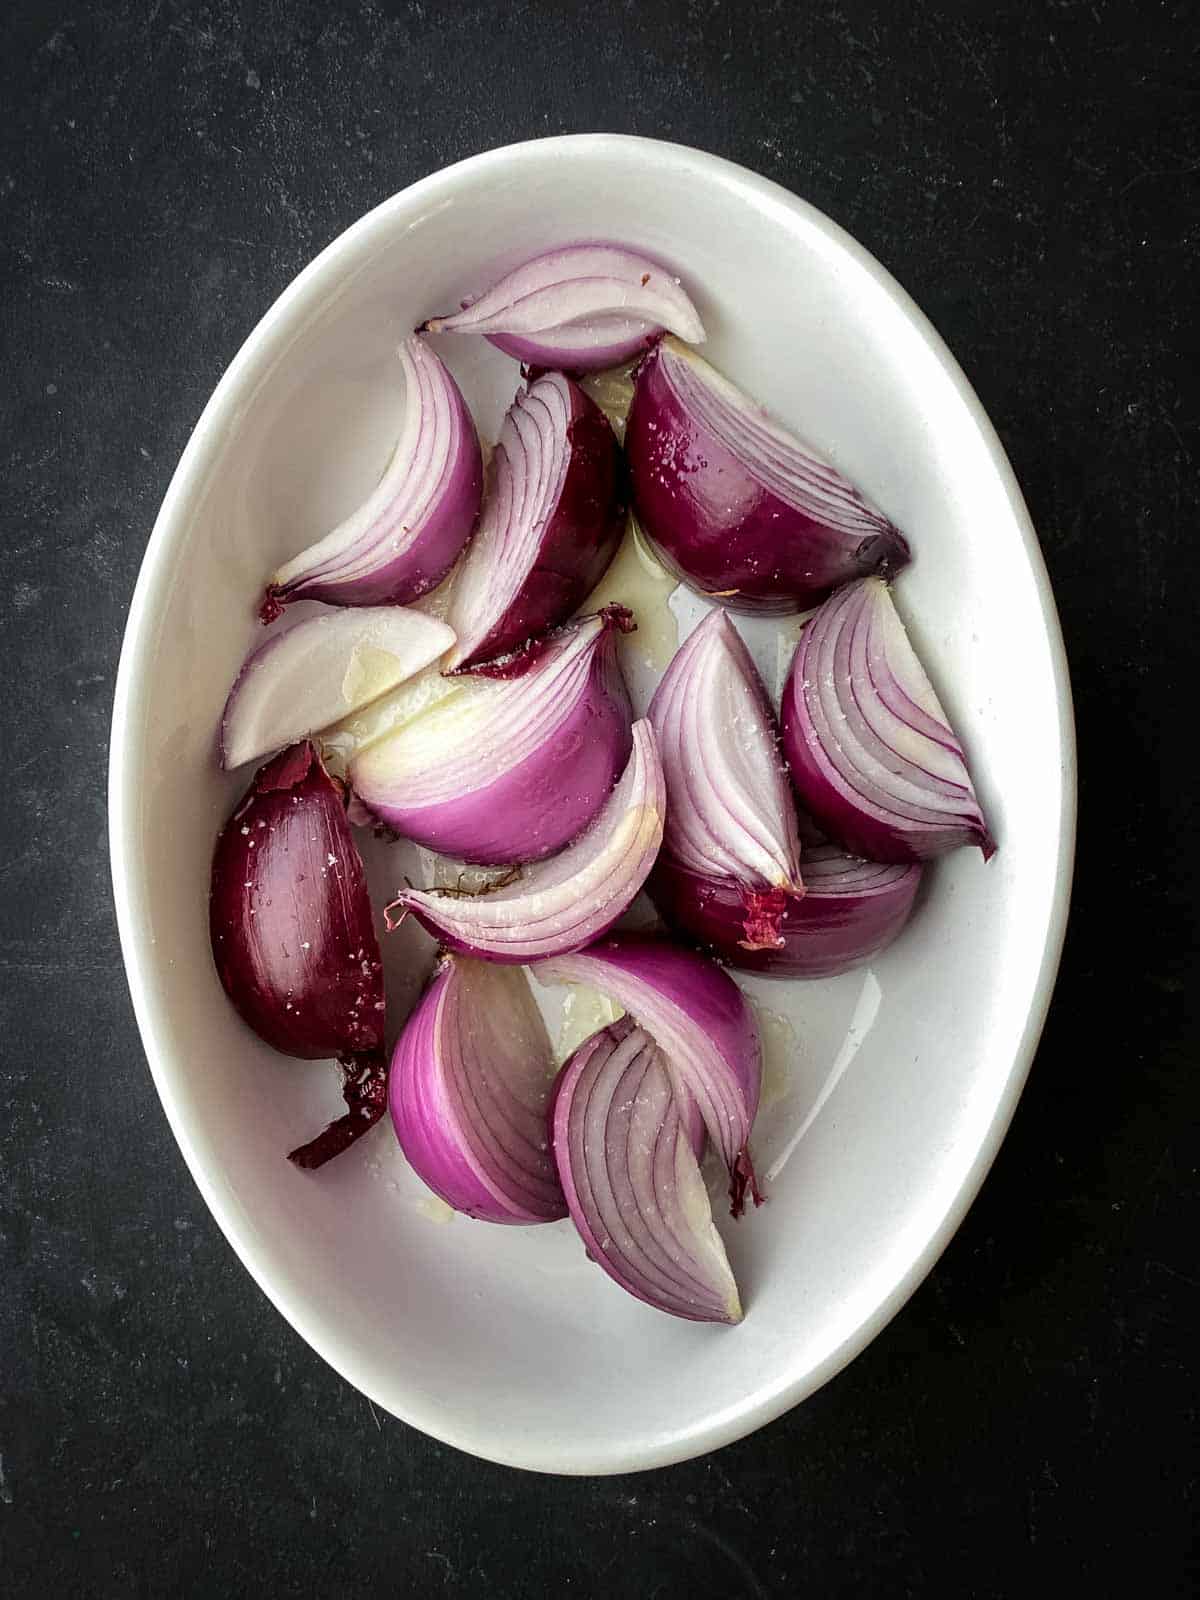 Wedges of roasted red onions in an oval ceramic baking dish